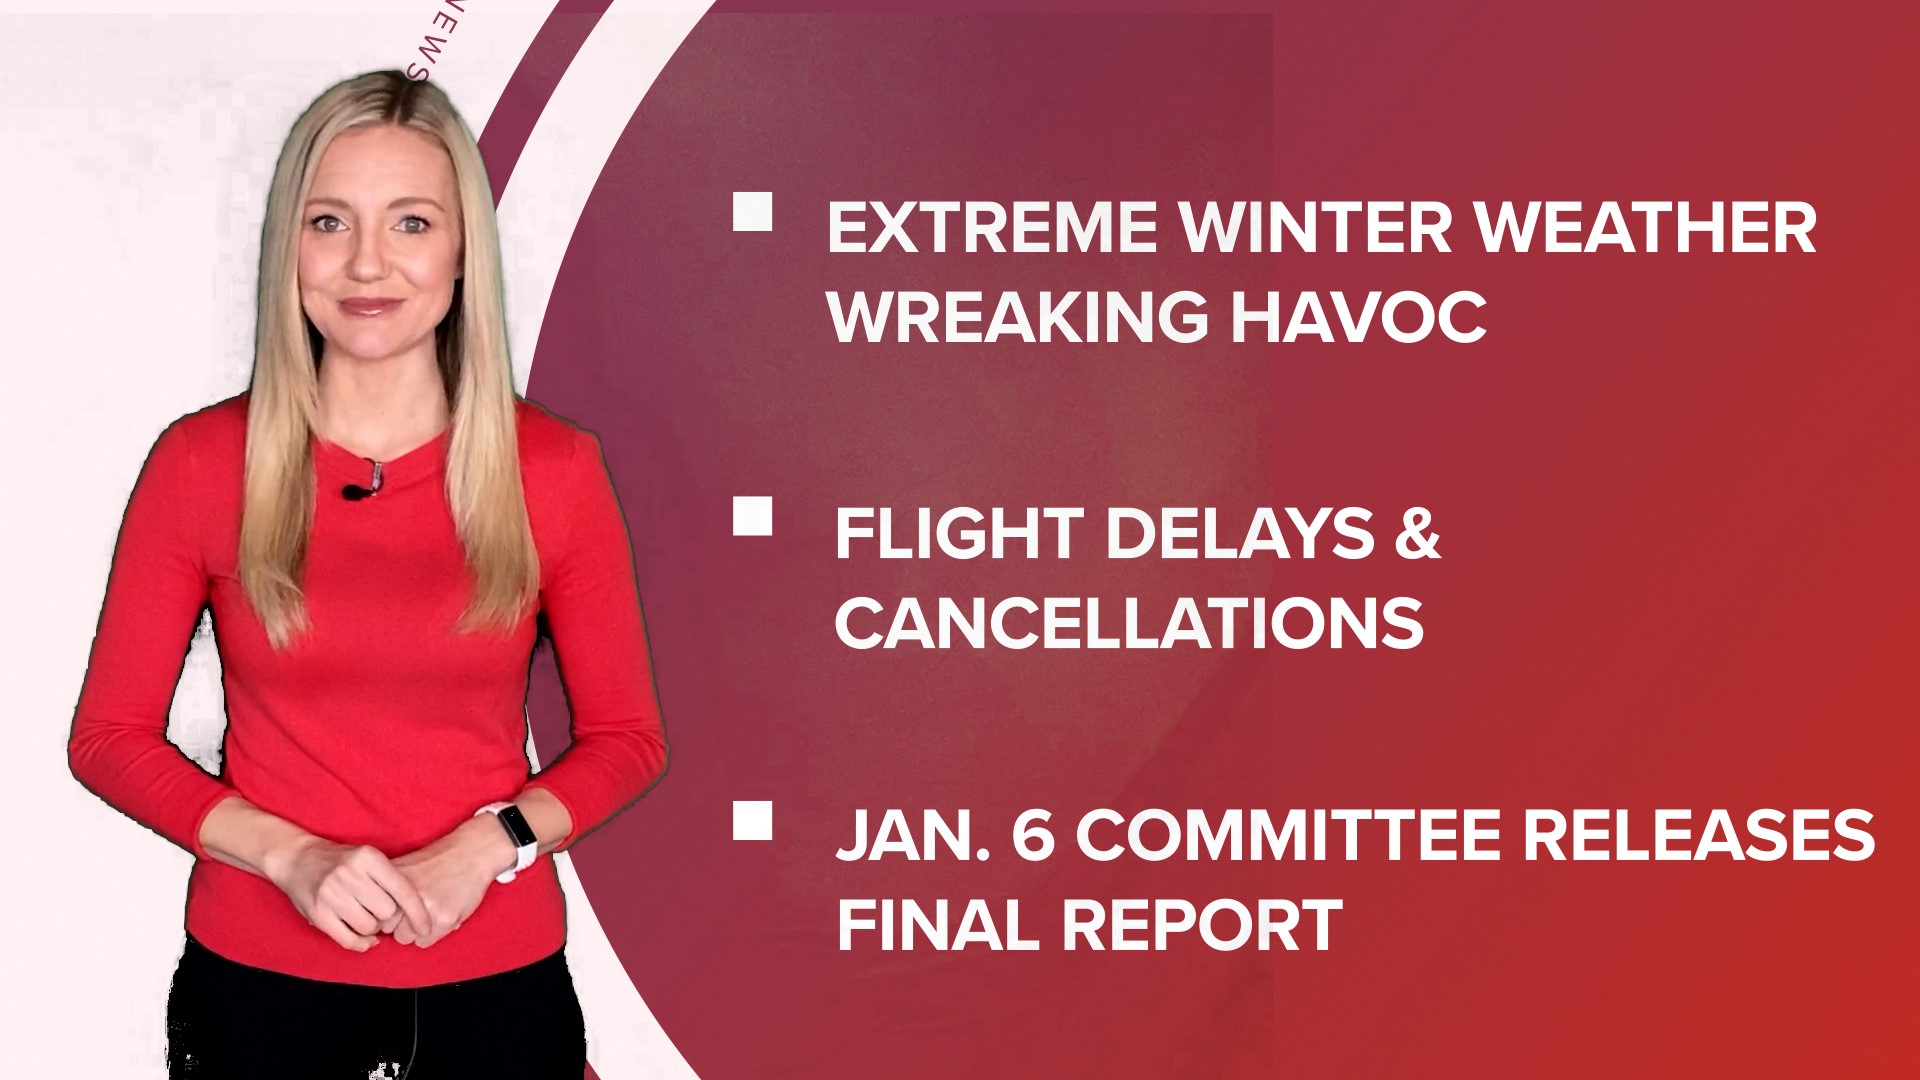 A look at what is happening in the news from a massive winter storm affecting holiday travel to the Jan. 6 final report.